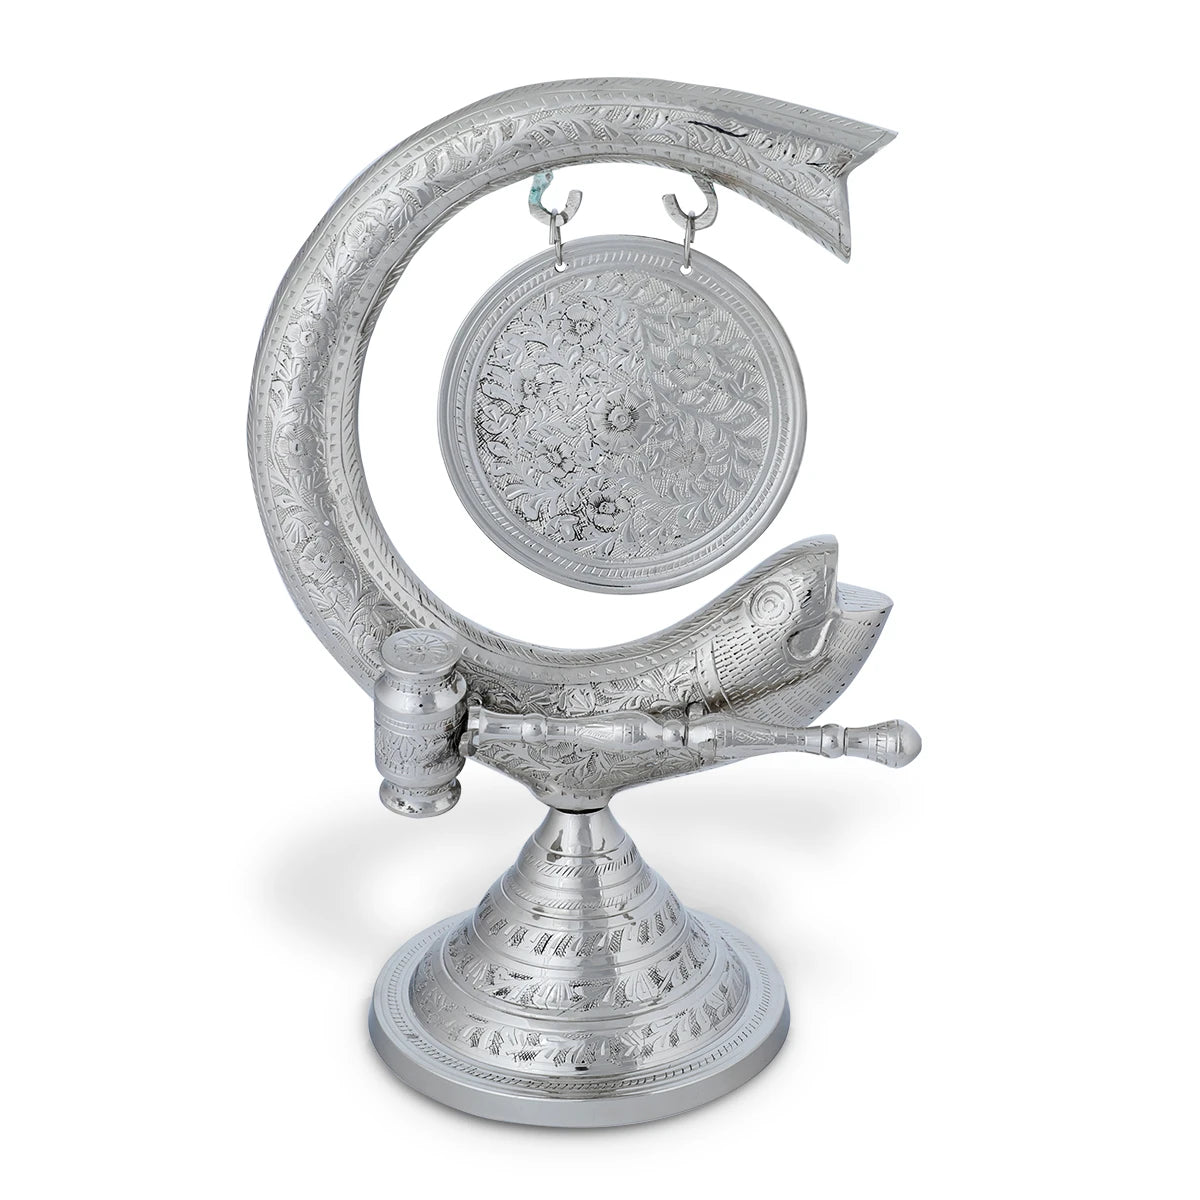 Front View of Glossy Silver Colored  Vintage finish Gong Fish Décor